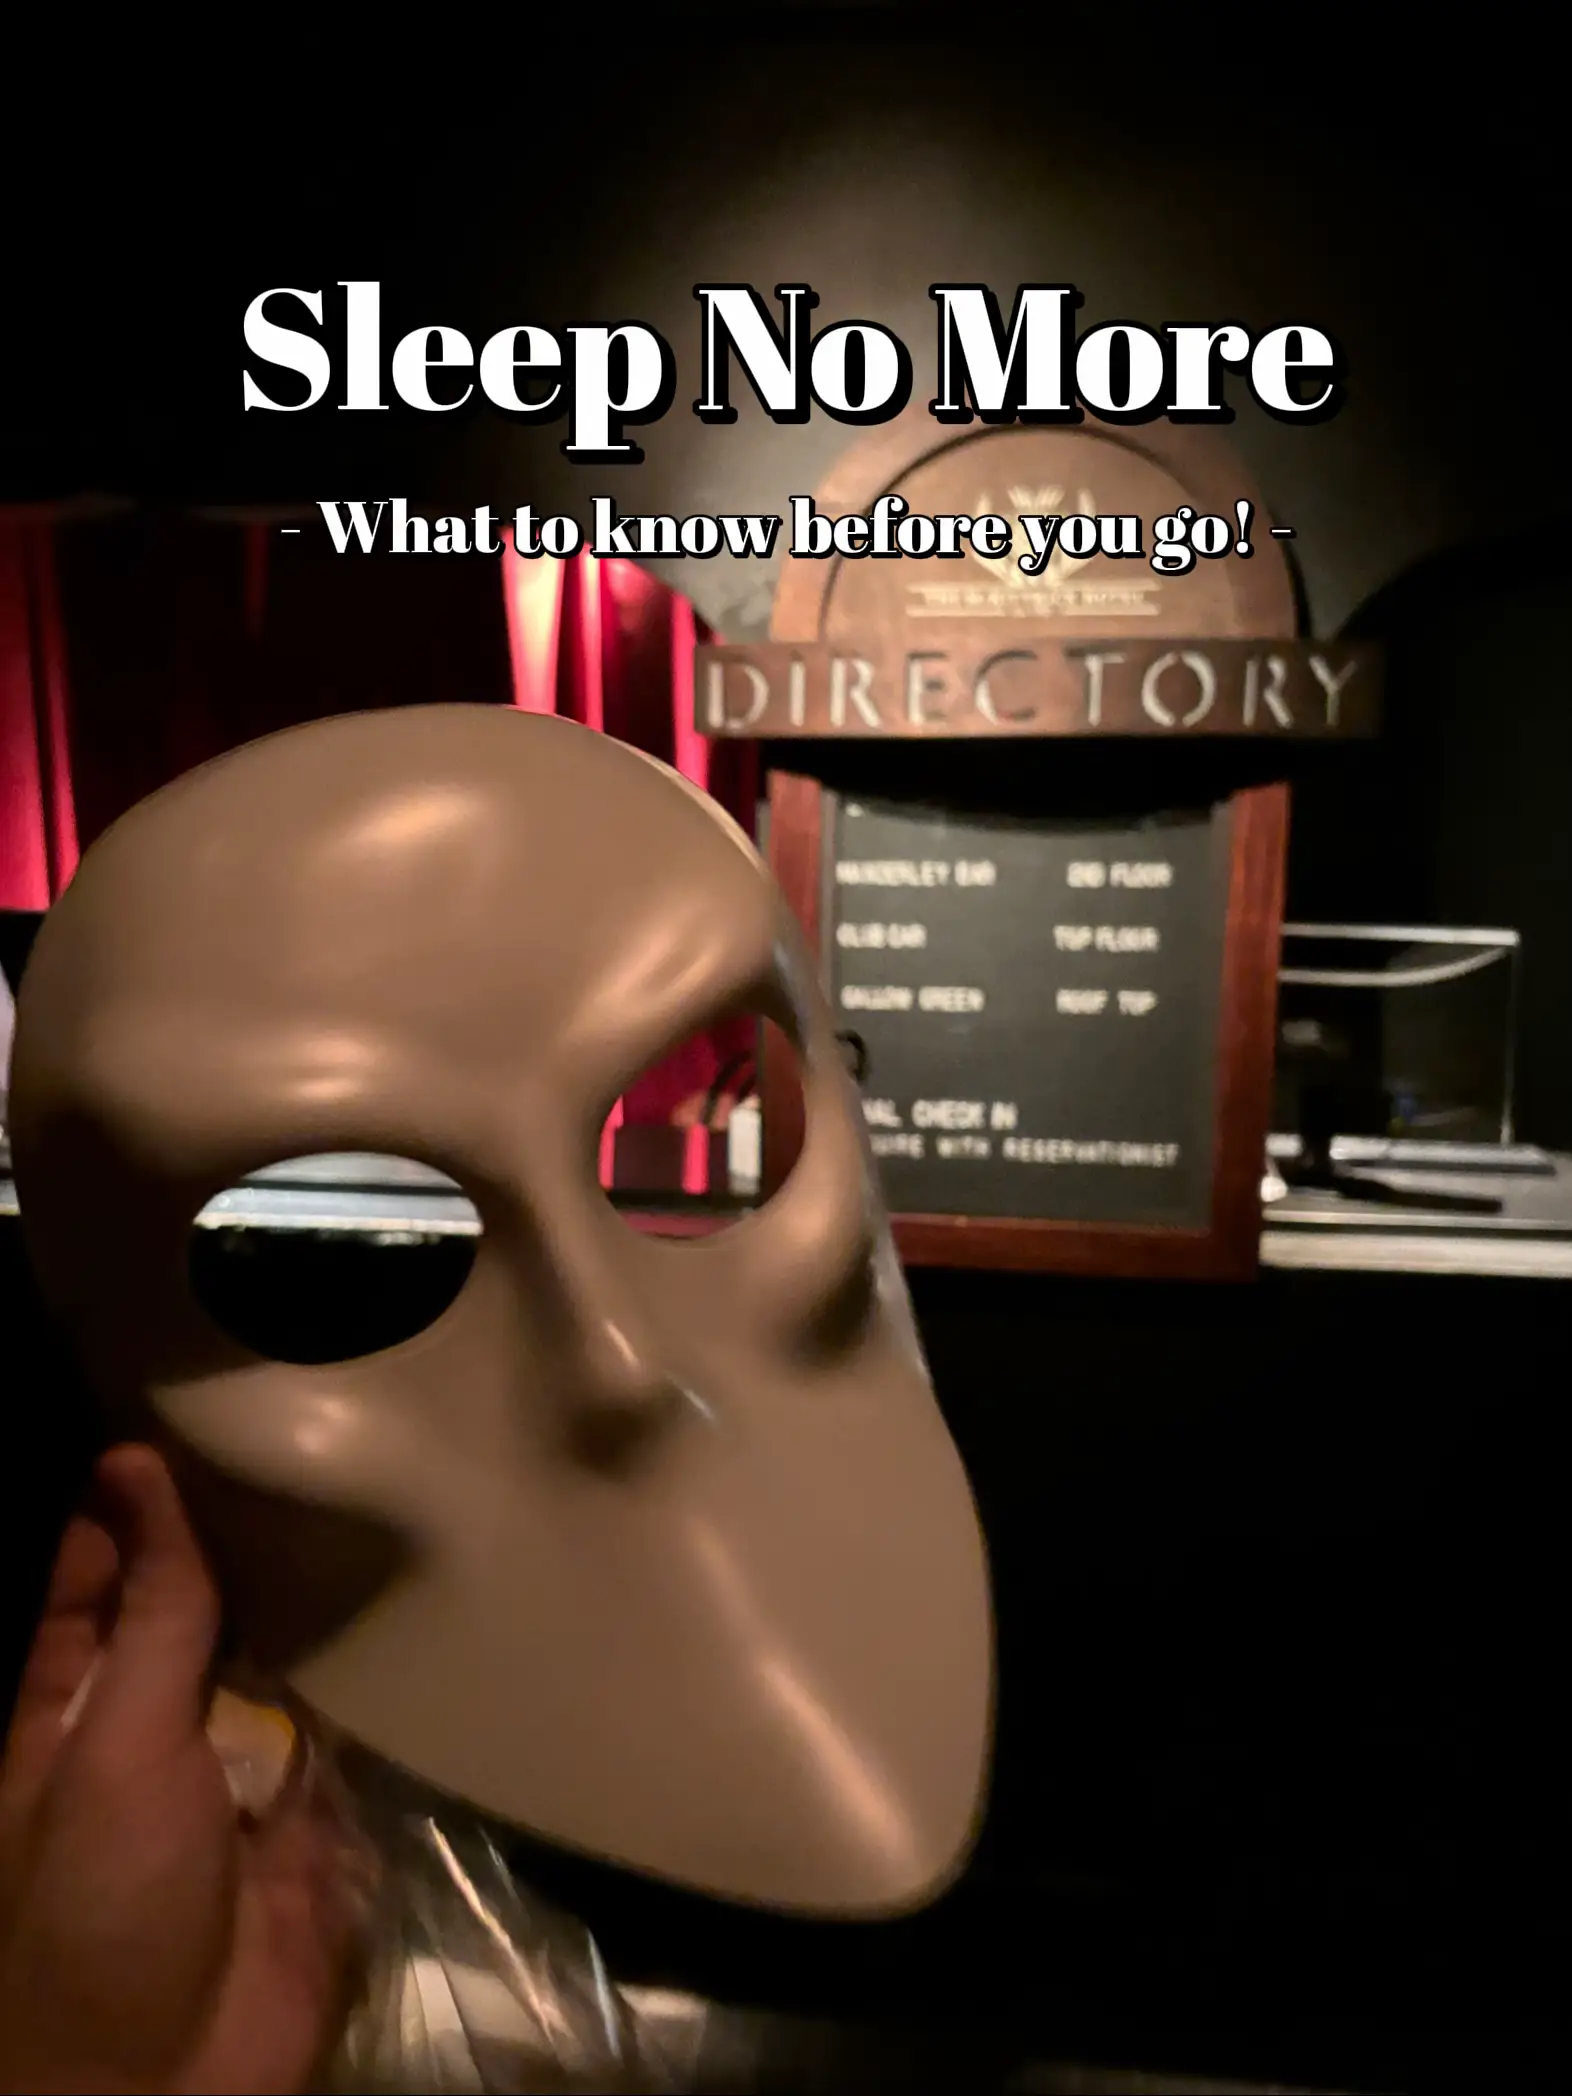 Everything you need to know about Sleep No More's images